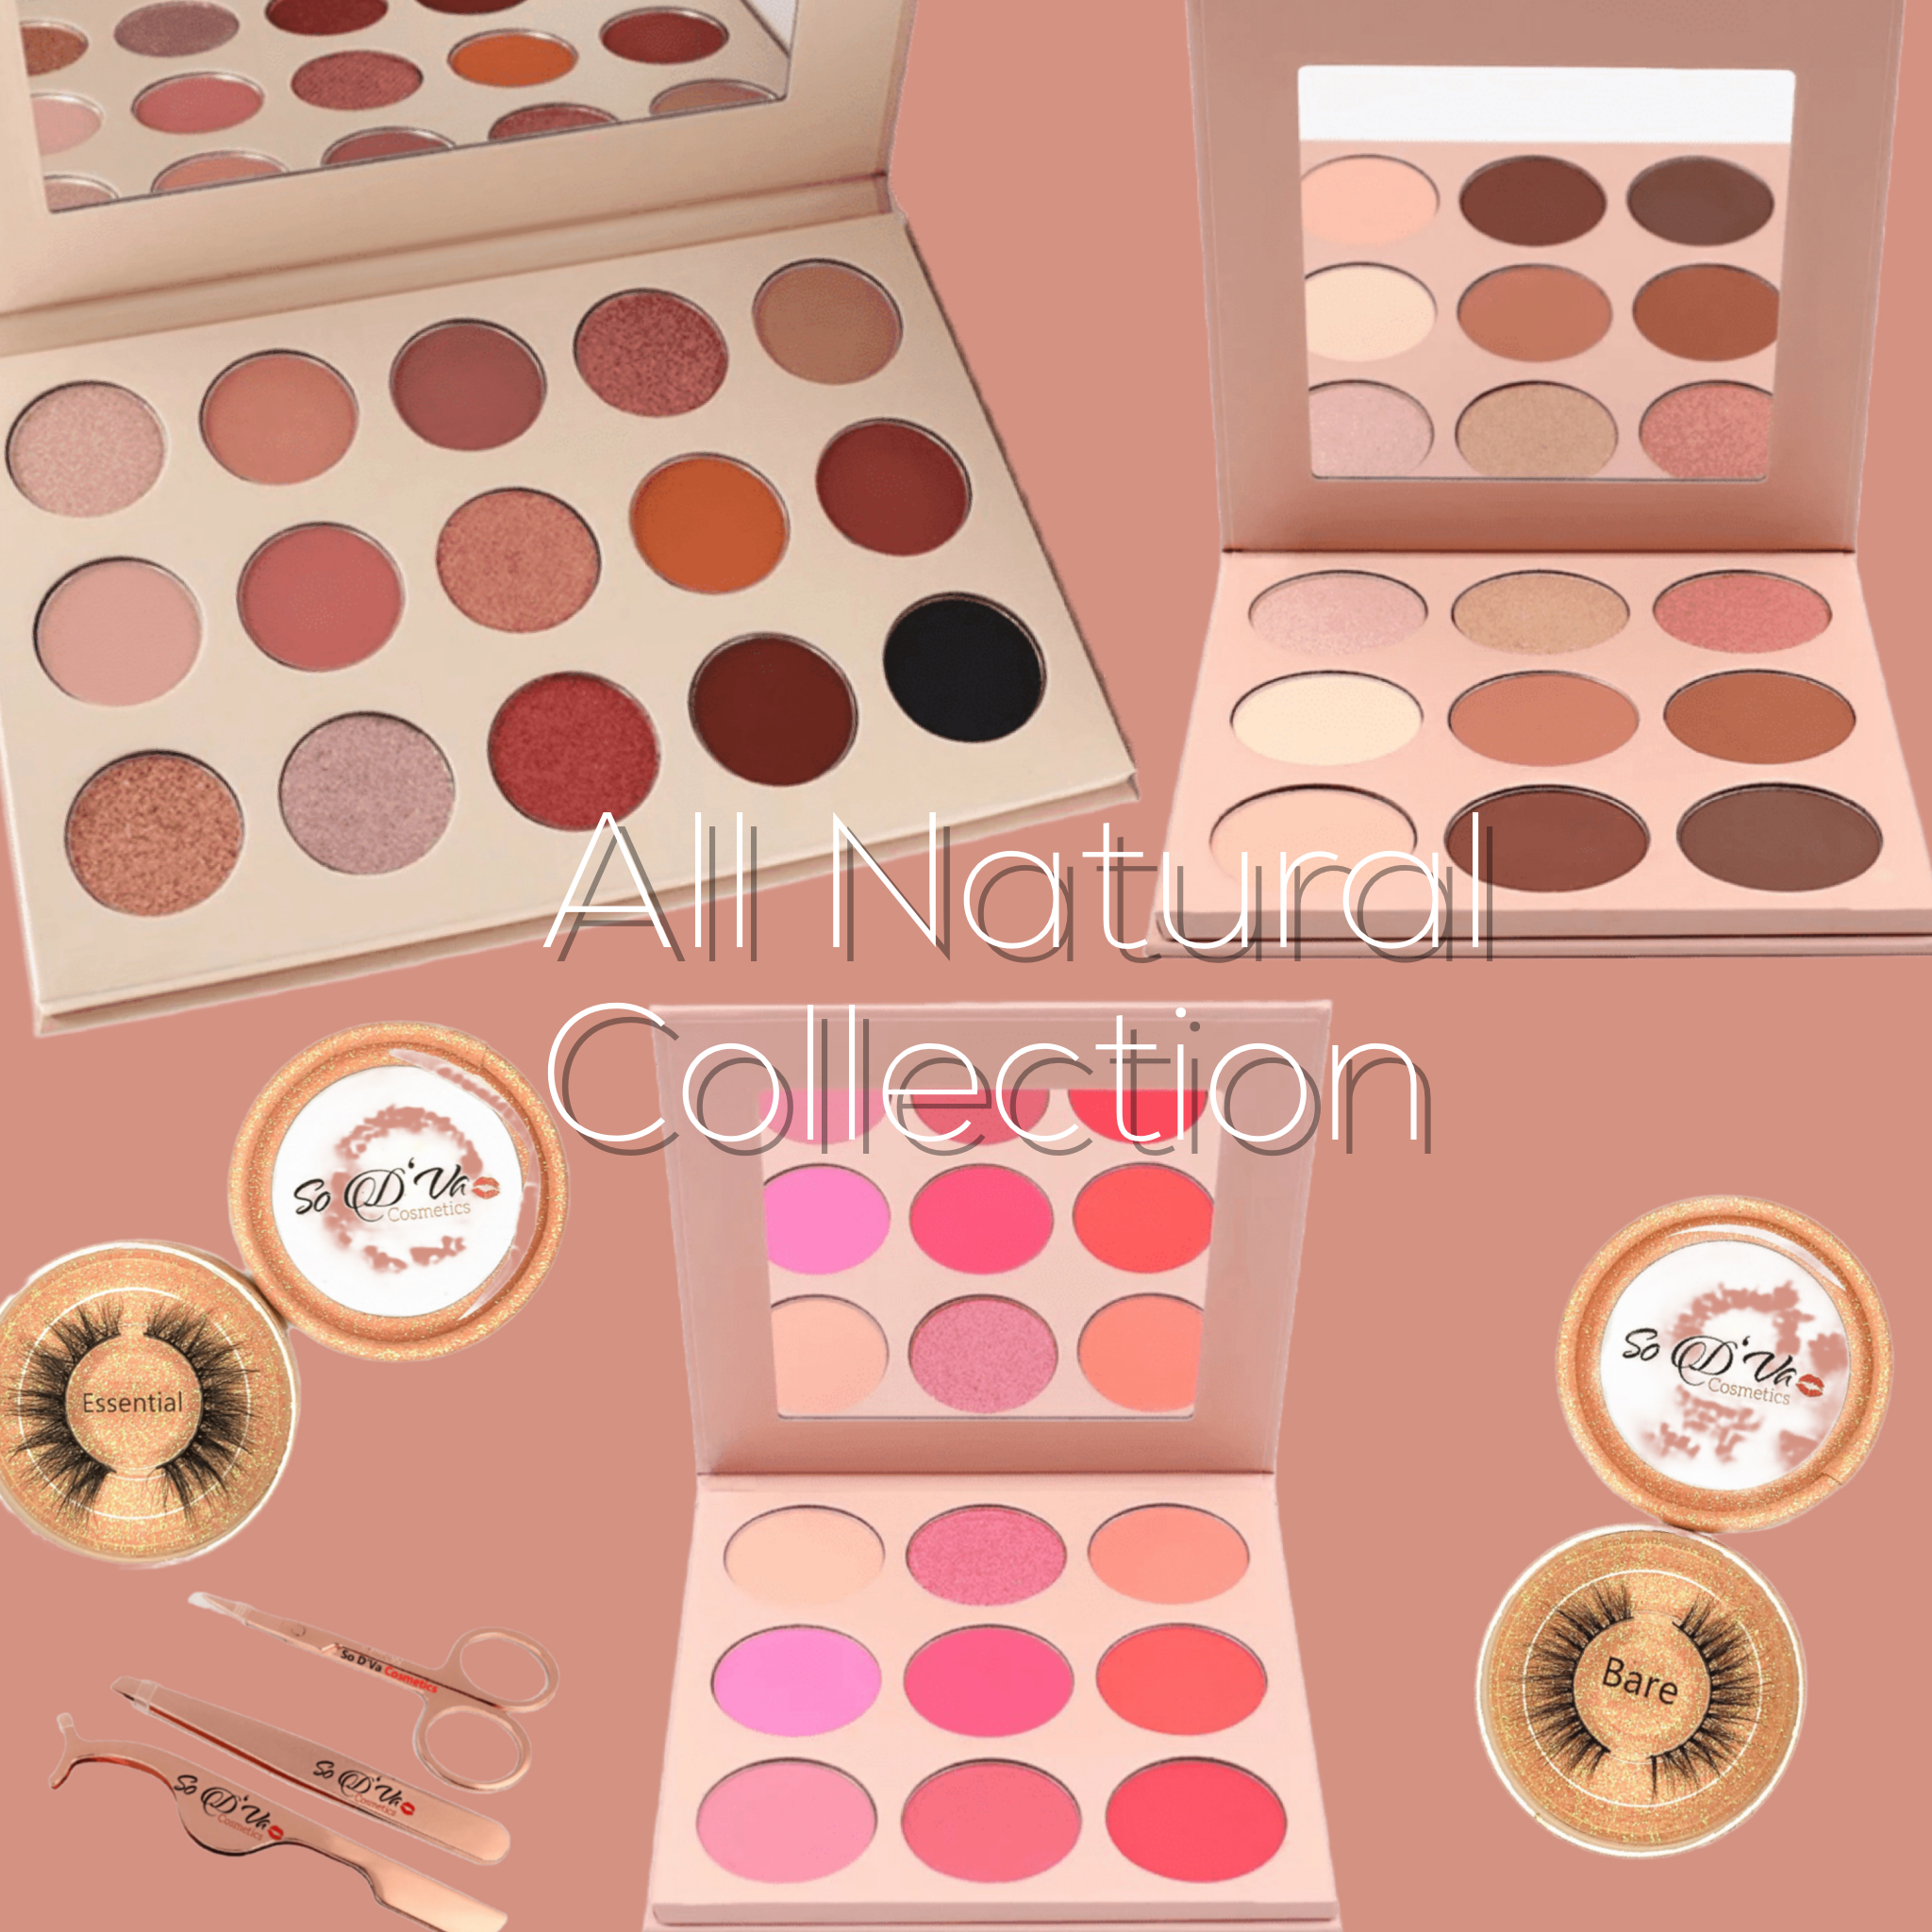 All Natural Collection 2